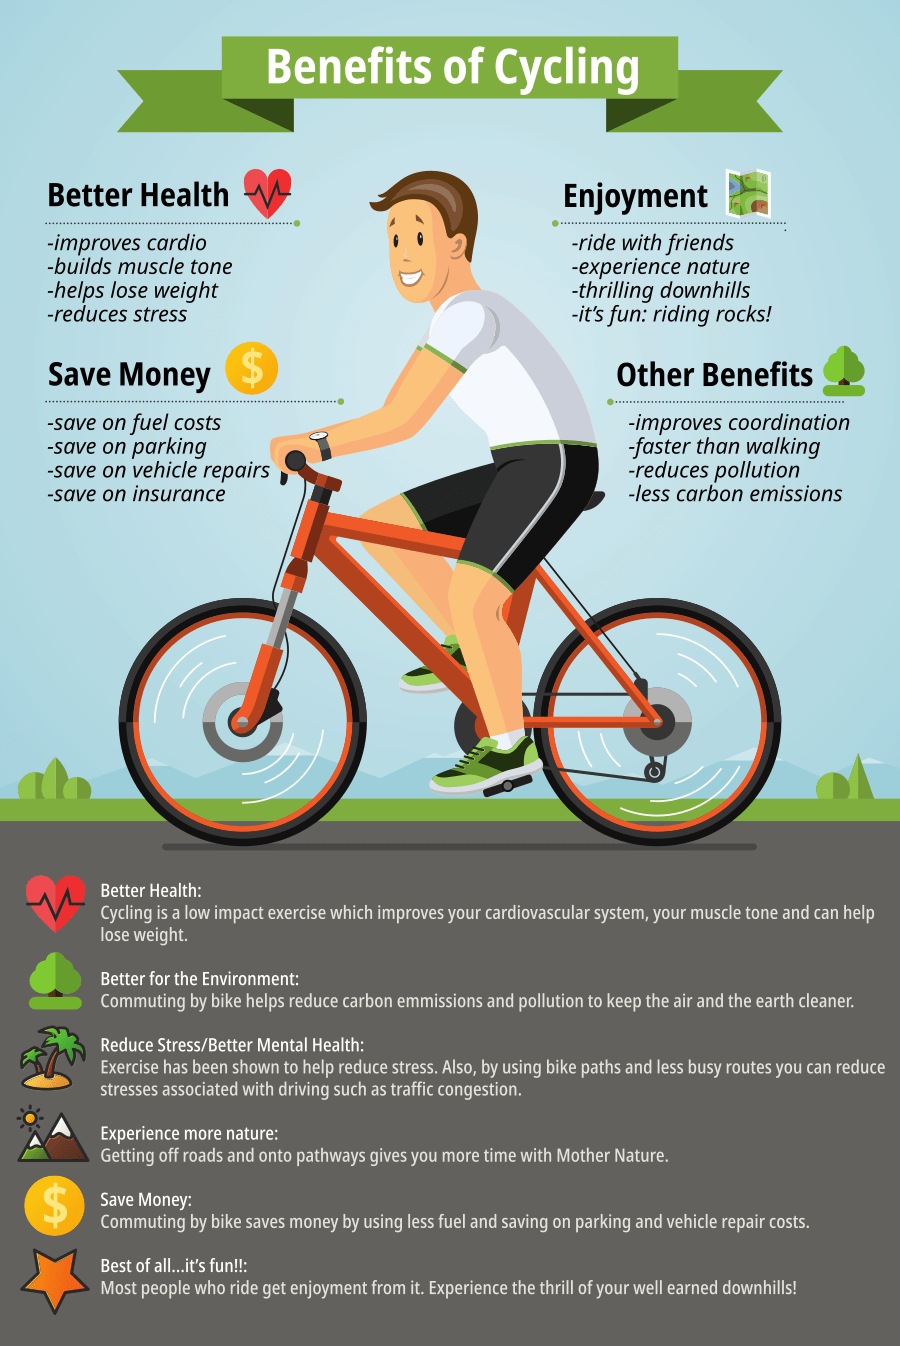 Benefits of Cycling Infographic Image